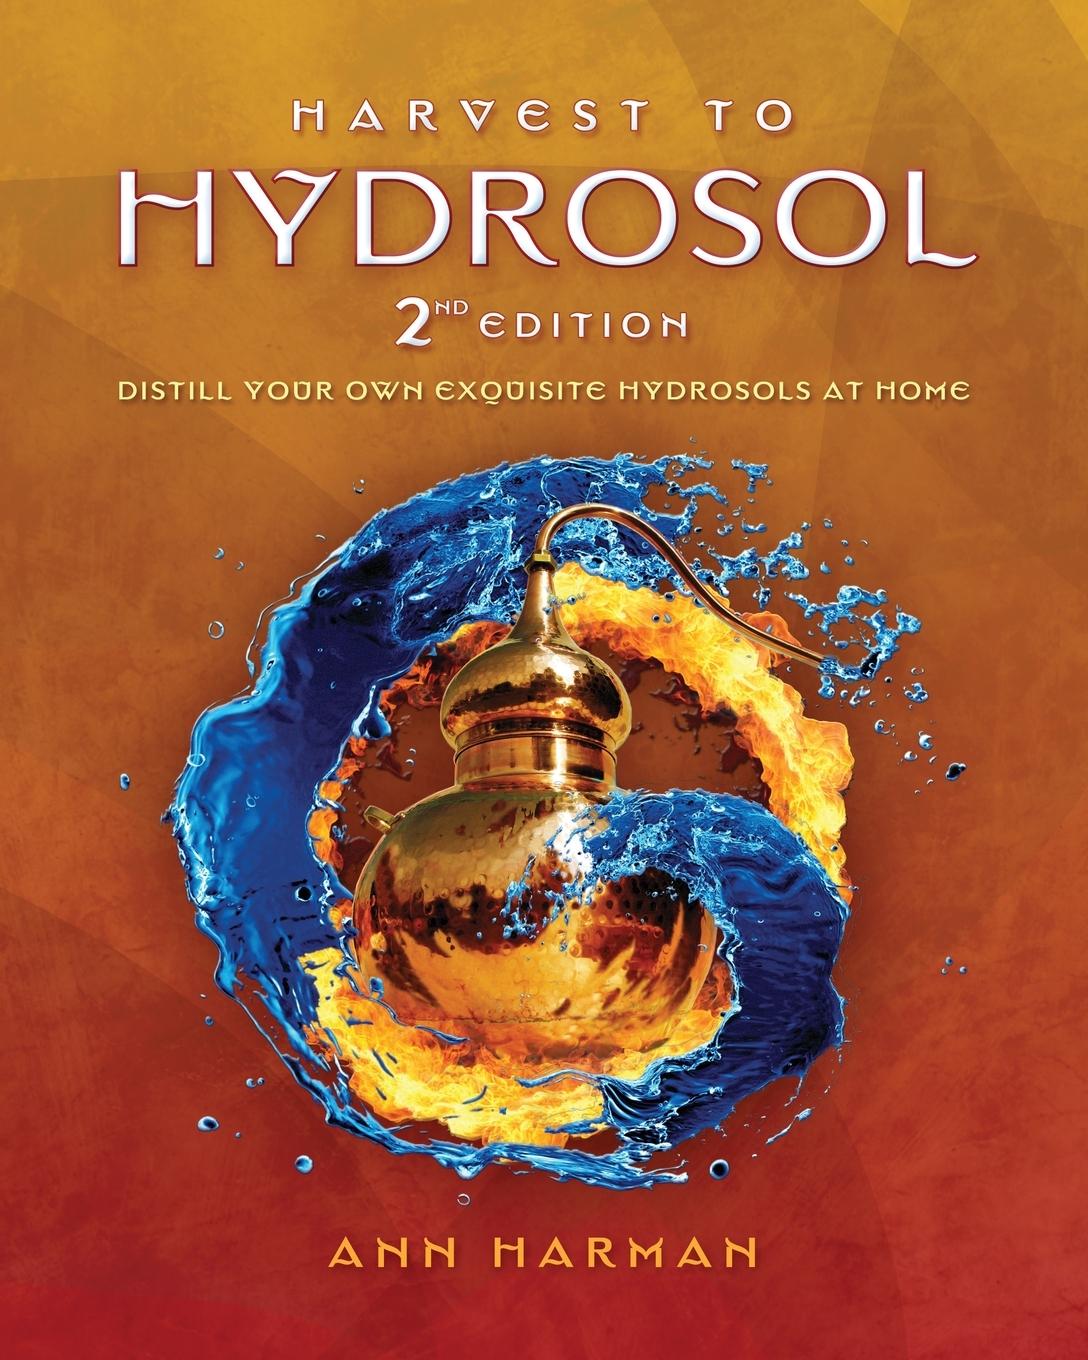 Book Harvest To Hydrosol Second Edition 